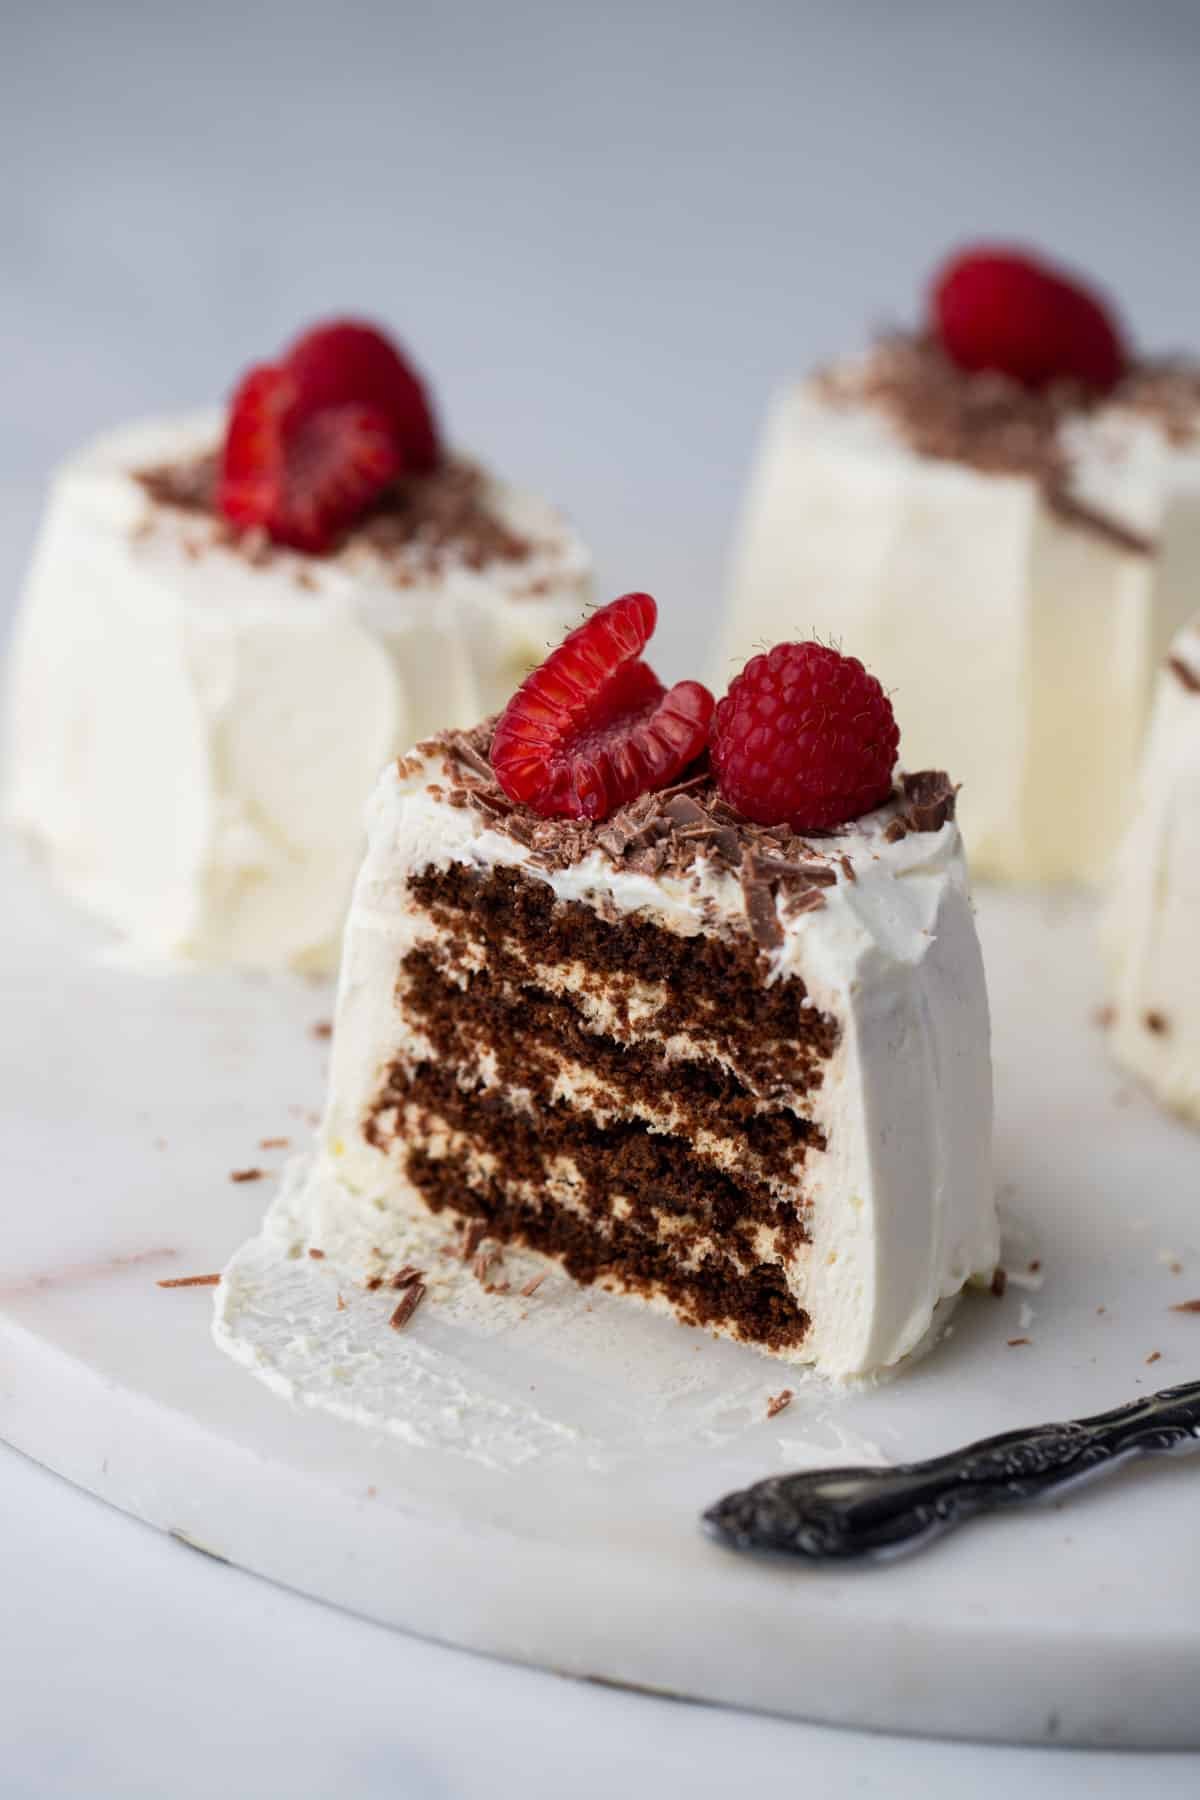 individual chocolate ripple cakes on a plate, topped with raspberries and chocolate.